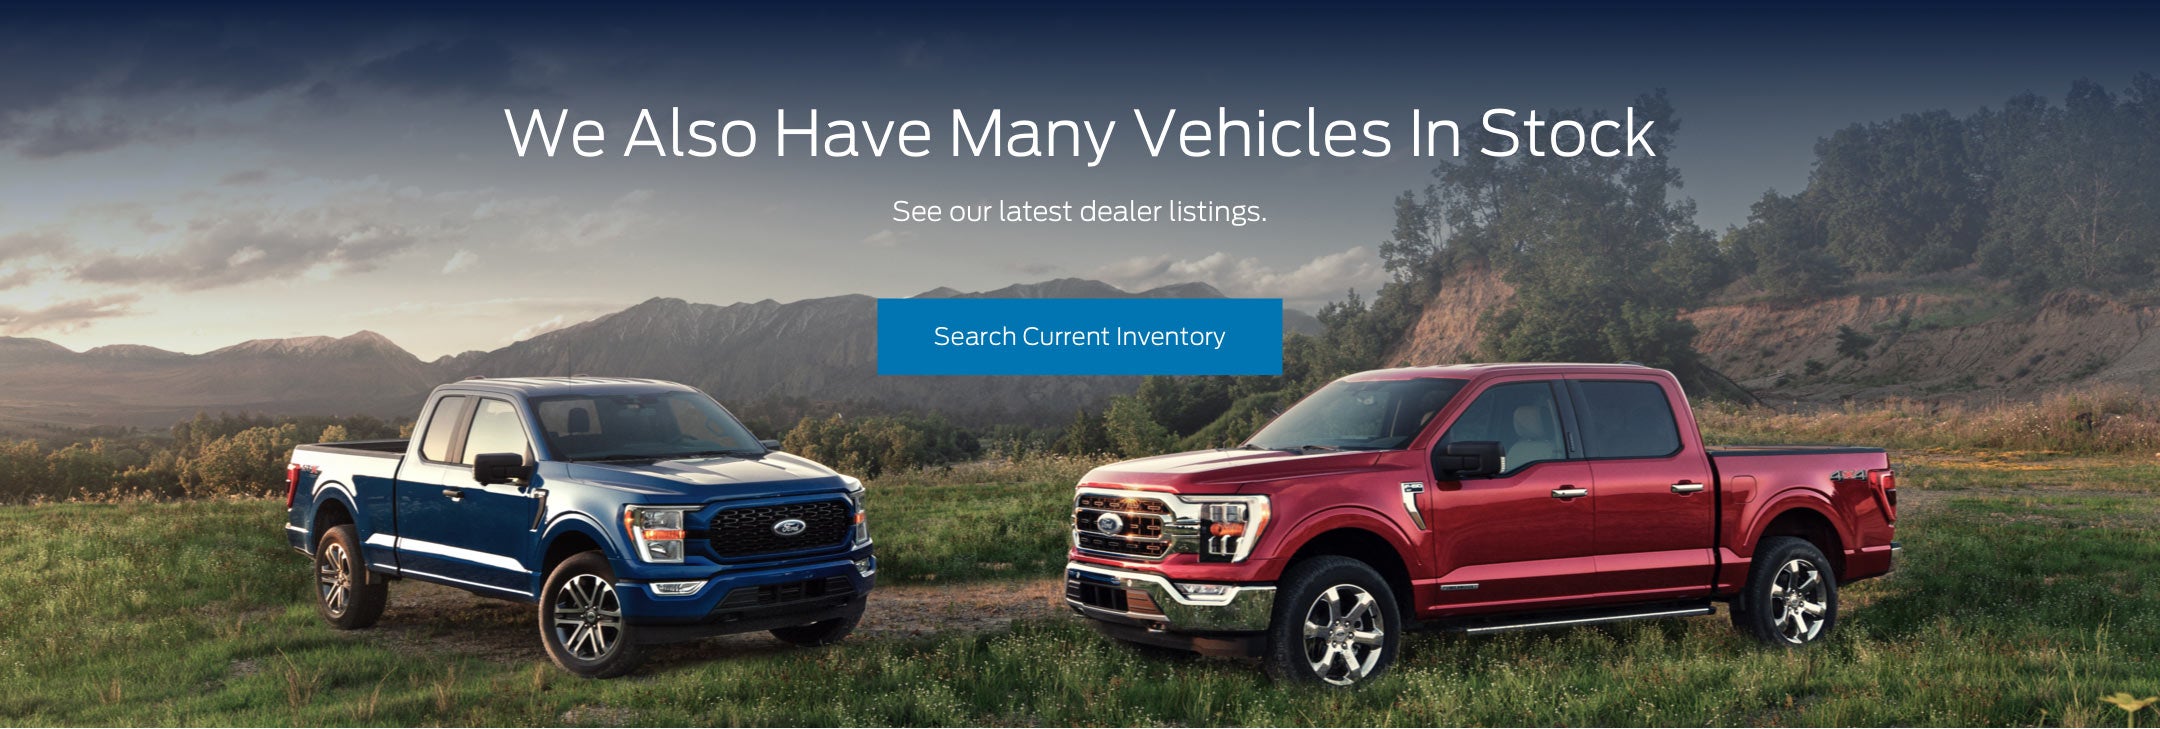 Ford vehicles in stock | Pierre Ford of Prosser in Prosser WA